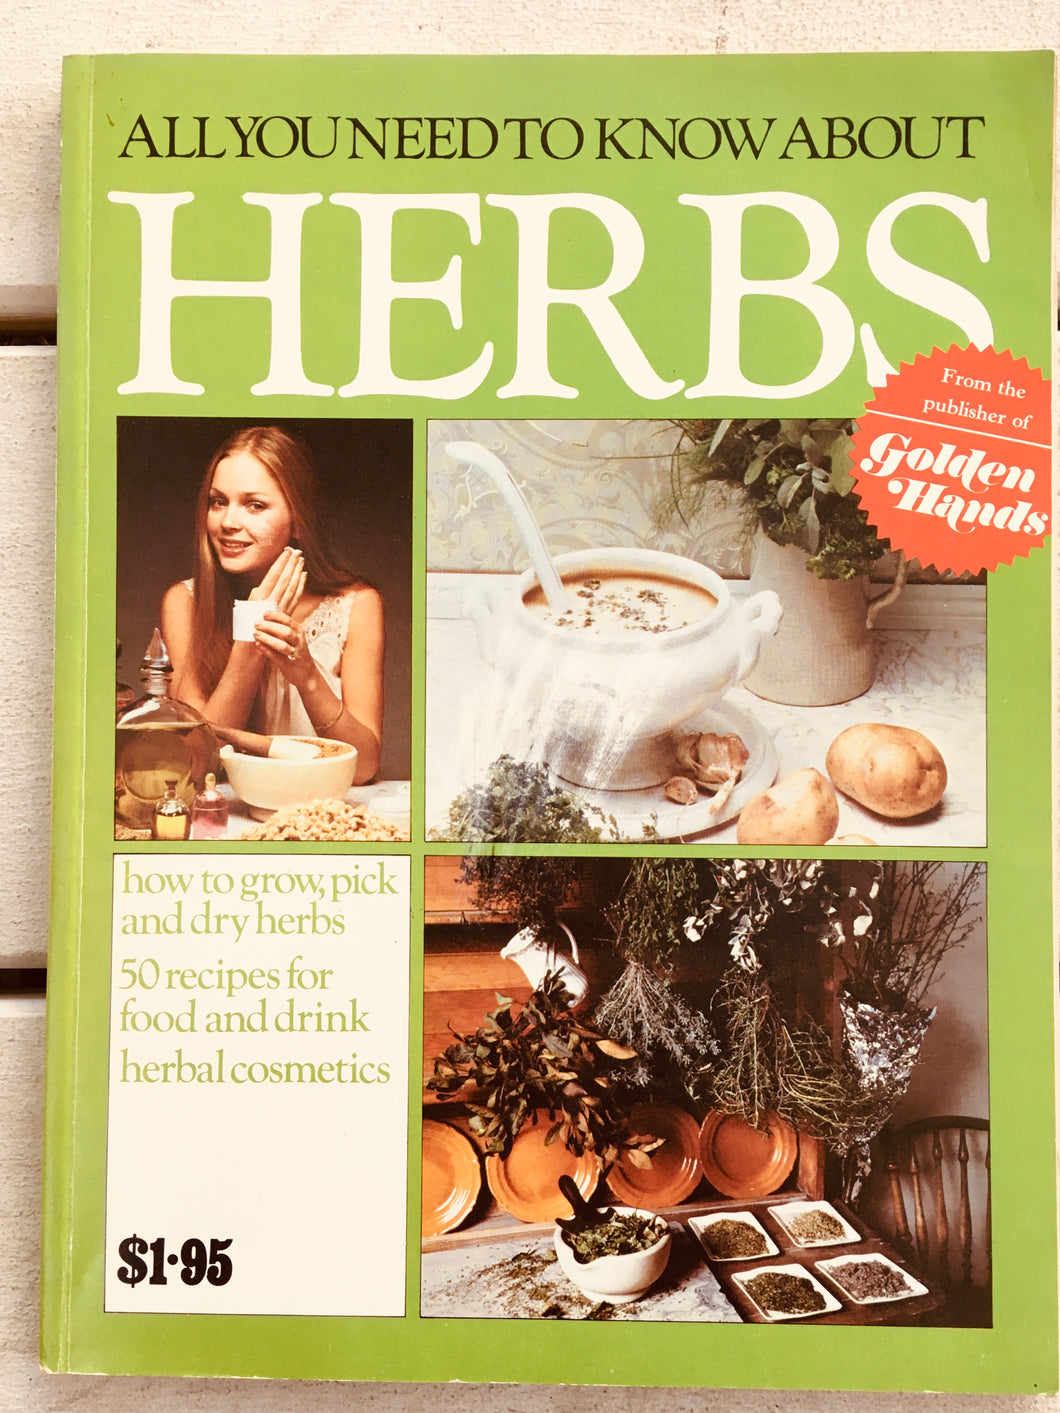 All You Need to Know About Herbs by Cynthia Wickham